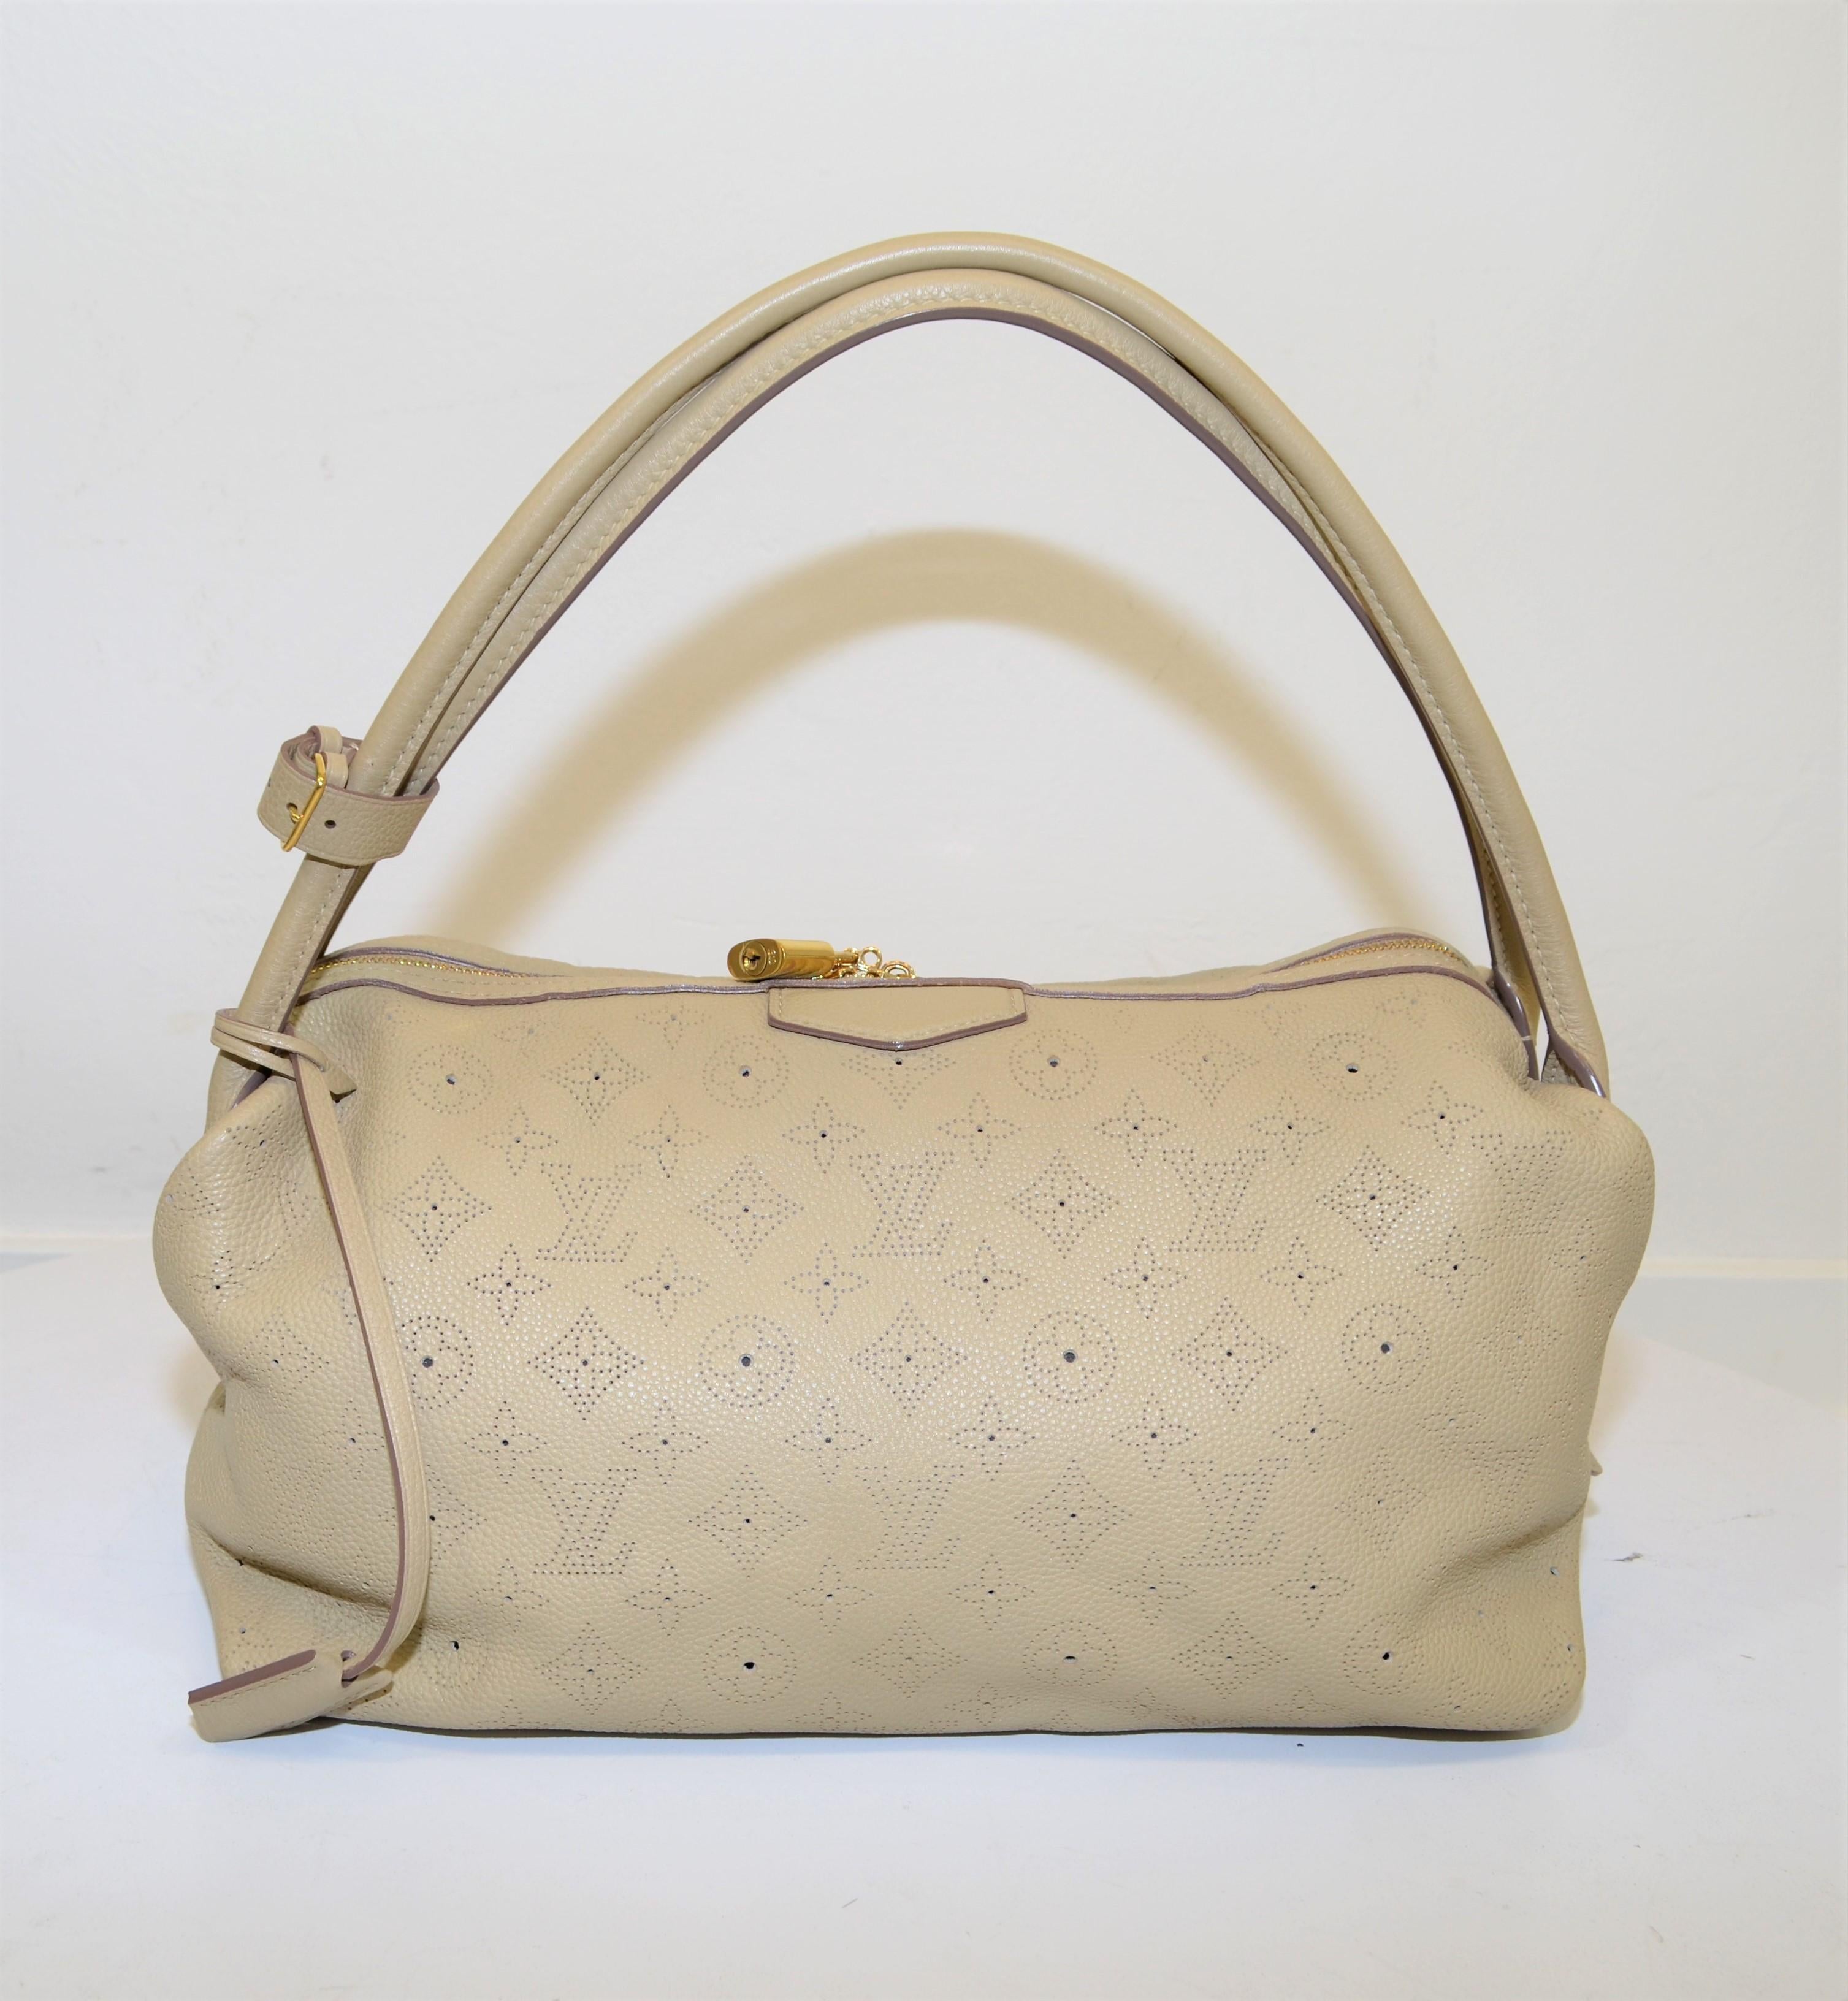 Louis Vuitton shoulder bag is featured in a neutral putty color perforated 